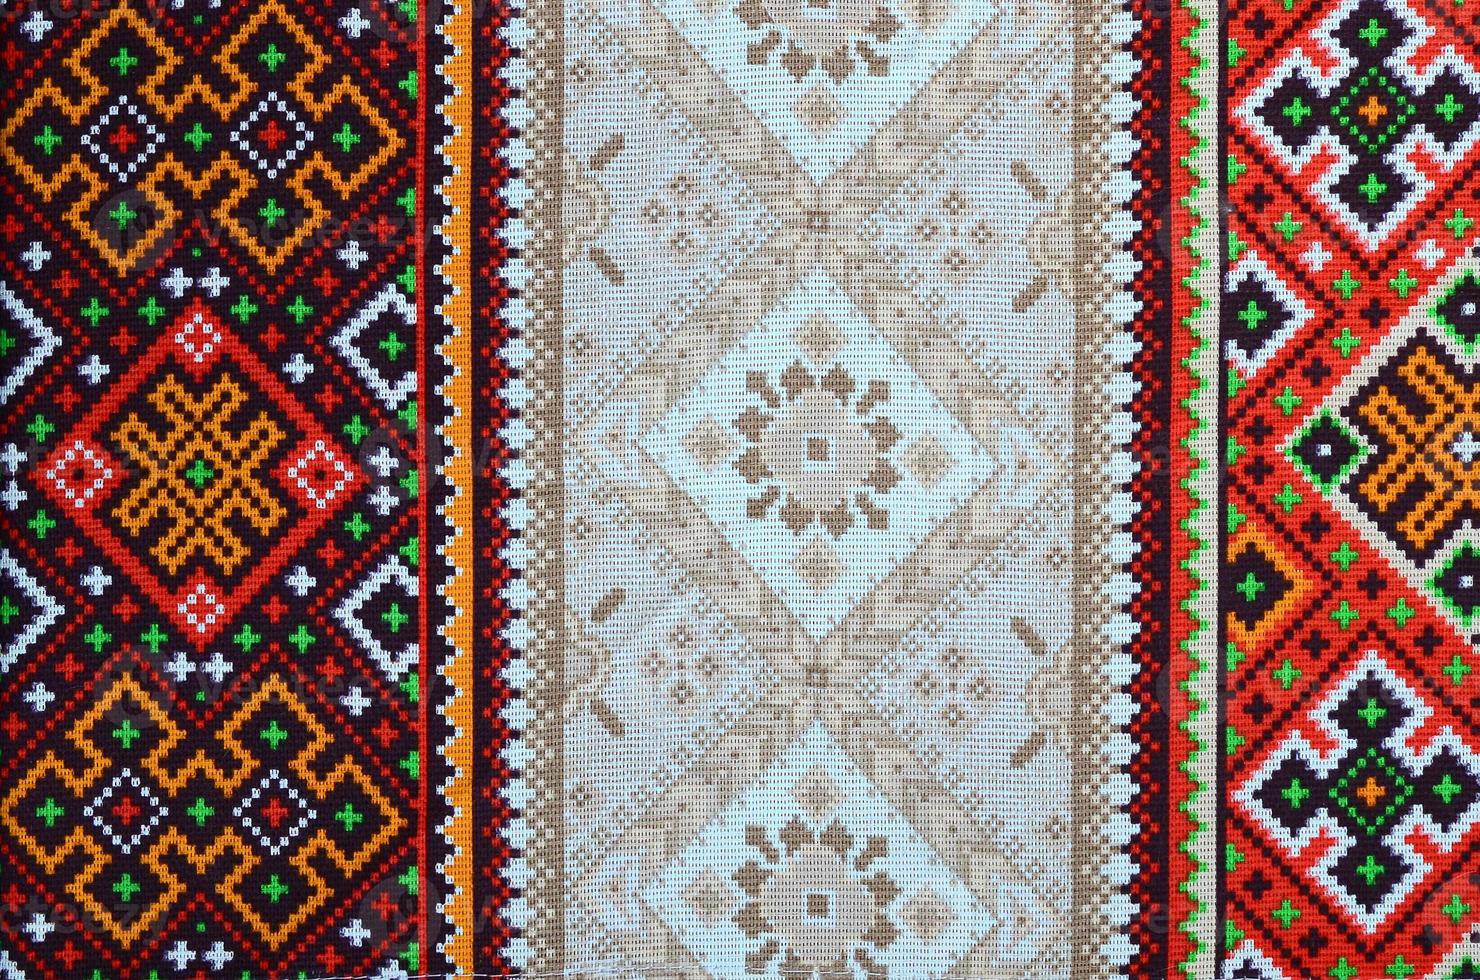 Traditional Ukrainian folk art knitted embroidery pattern on textile fabric photo